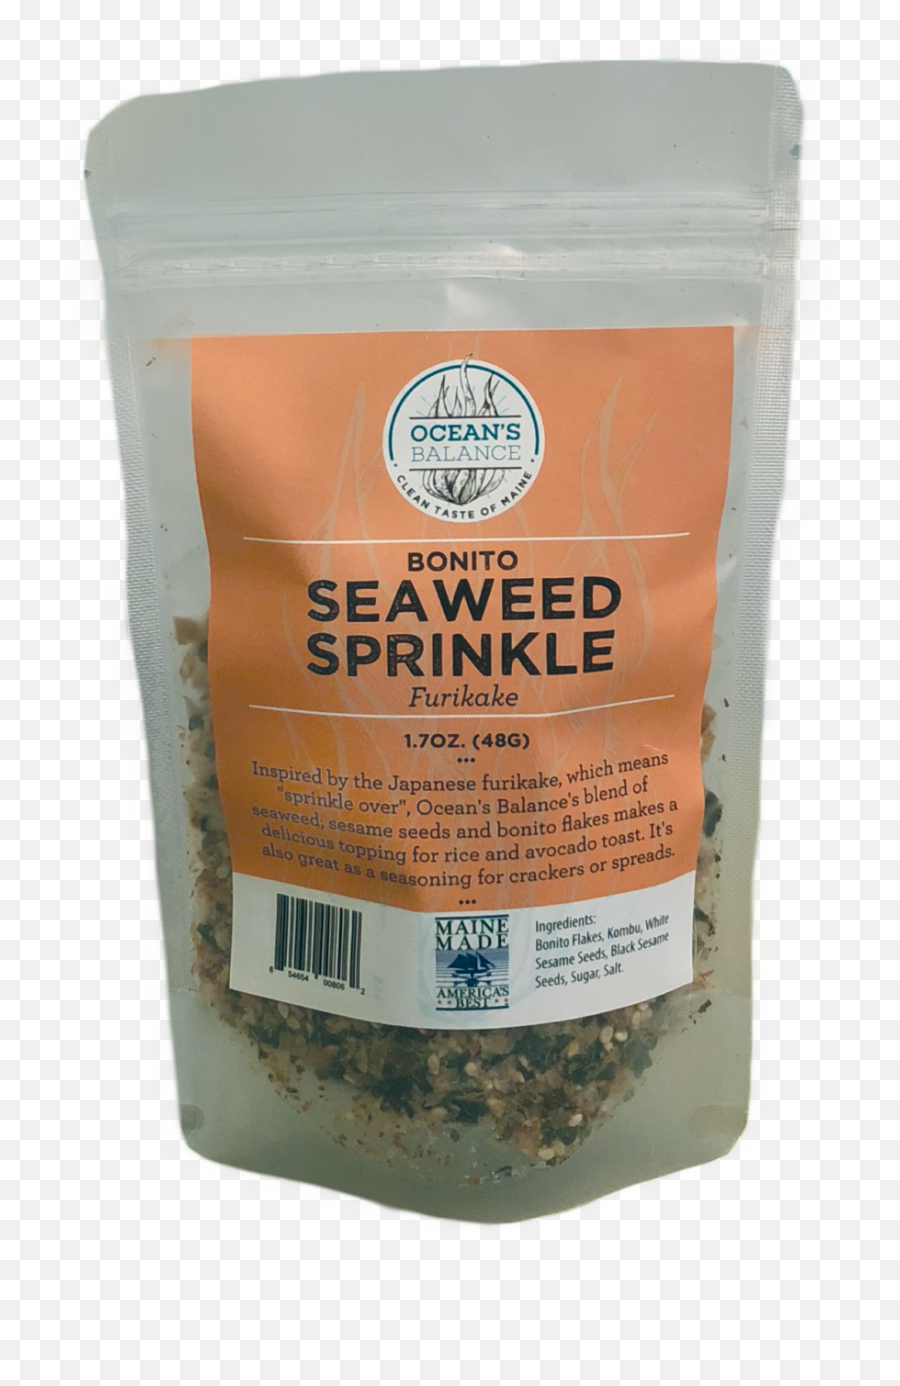 Download Bonito Seaweed Sprinkle - Full Size Png Image Pngkit Coffee,Sprinkle Png